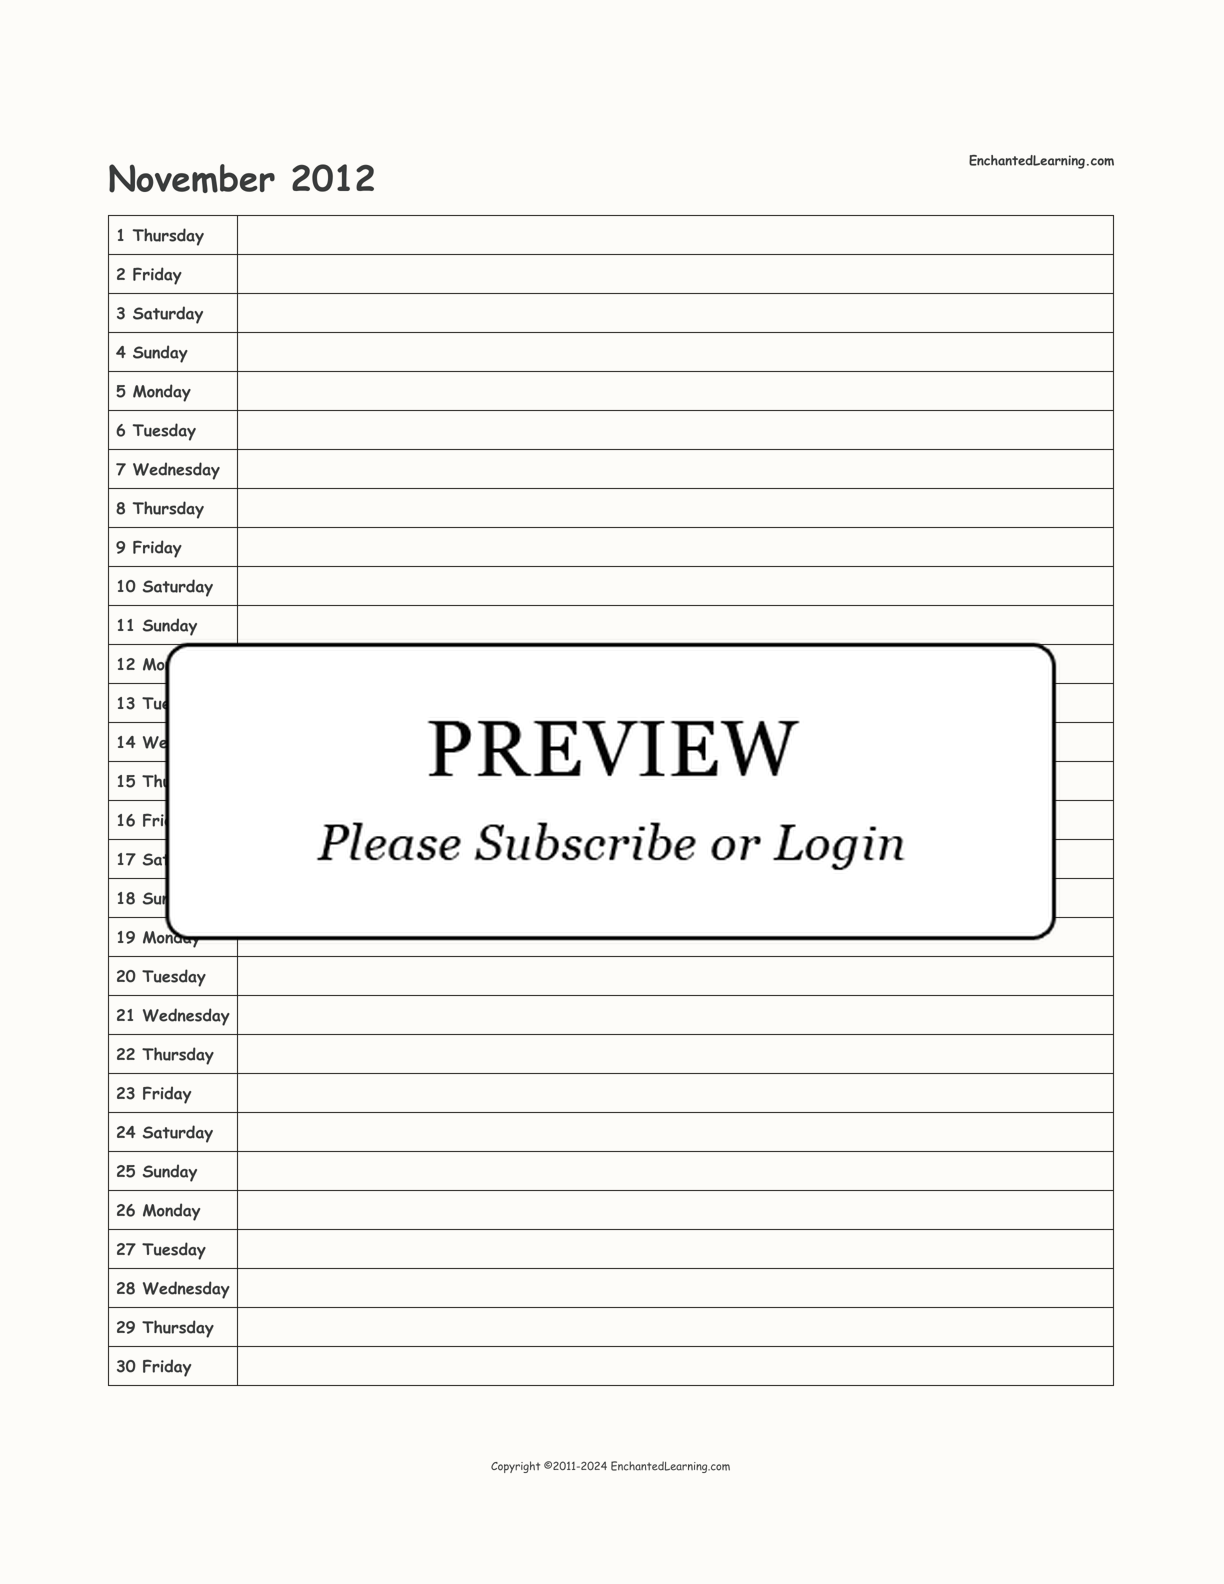 2012 Scheduling Calendar interactive printout page 11